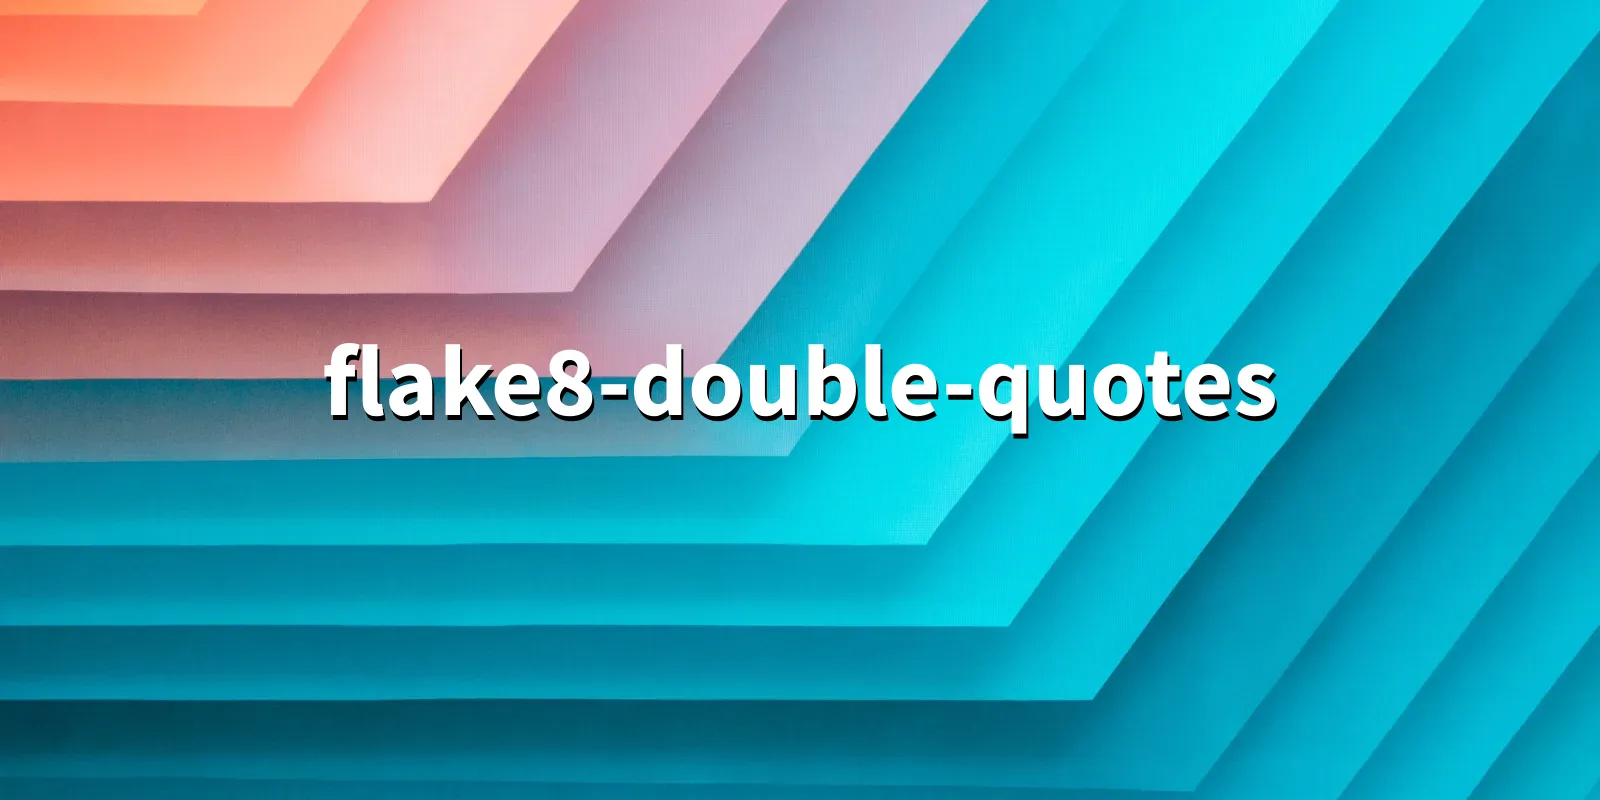 /pkg/f/flake8-double-quotes/flake8-double-quotes-banner.webp